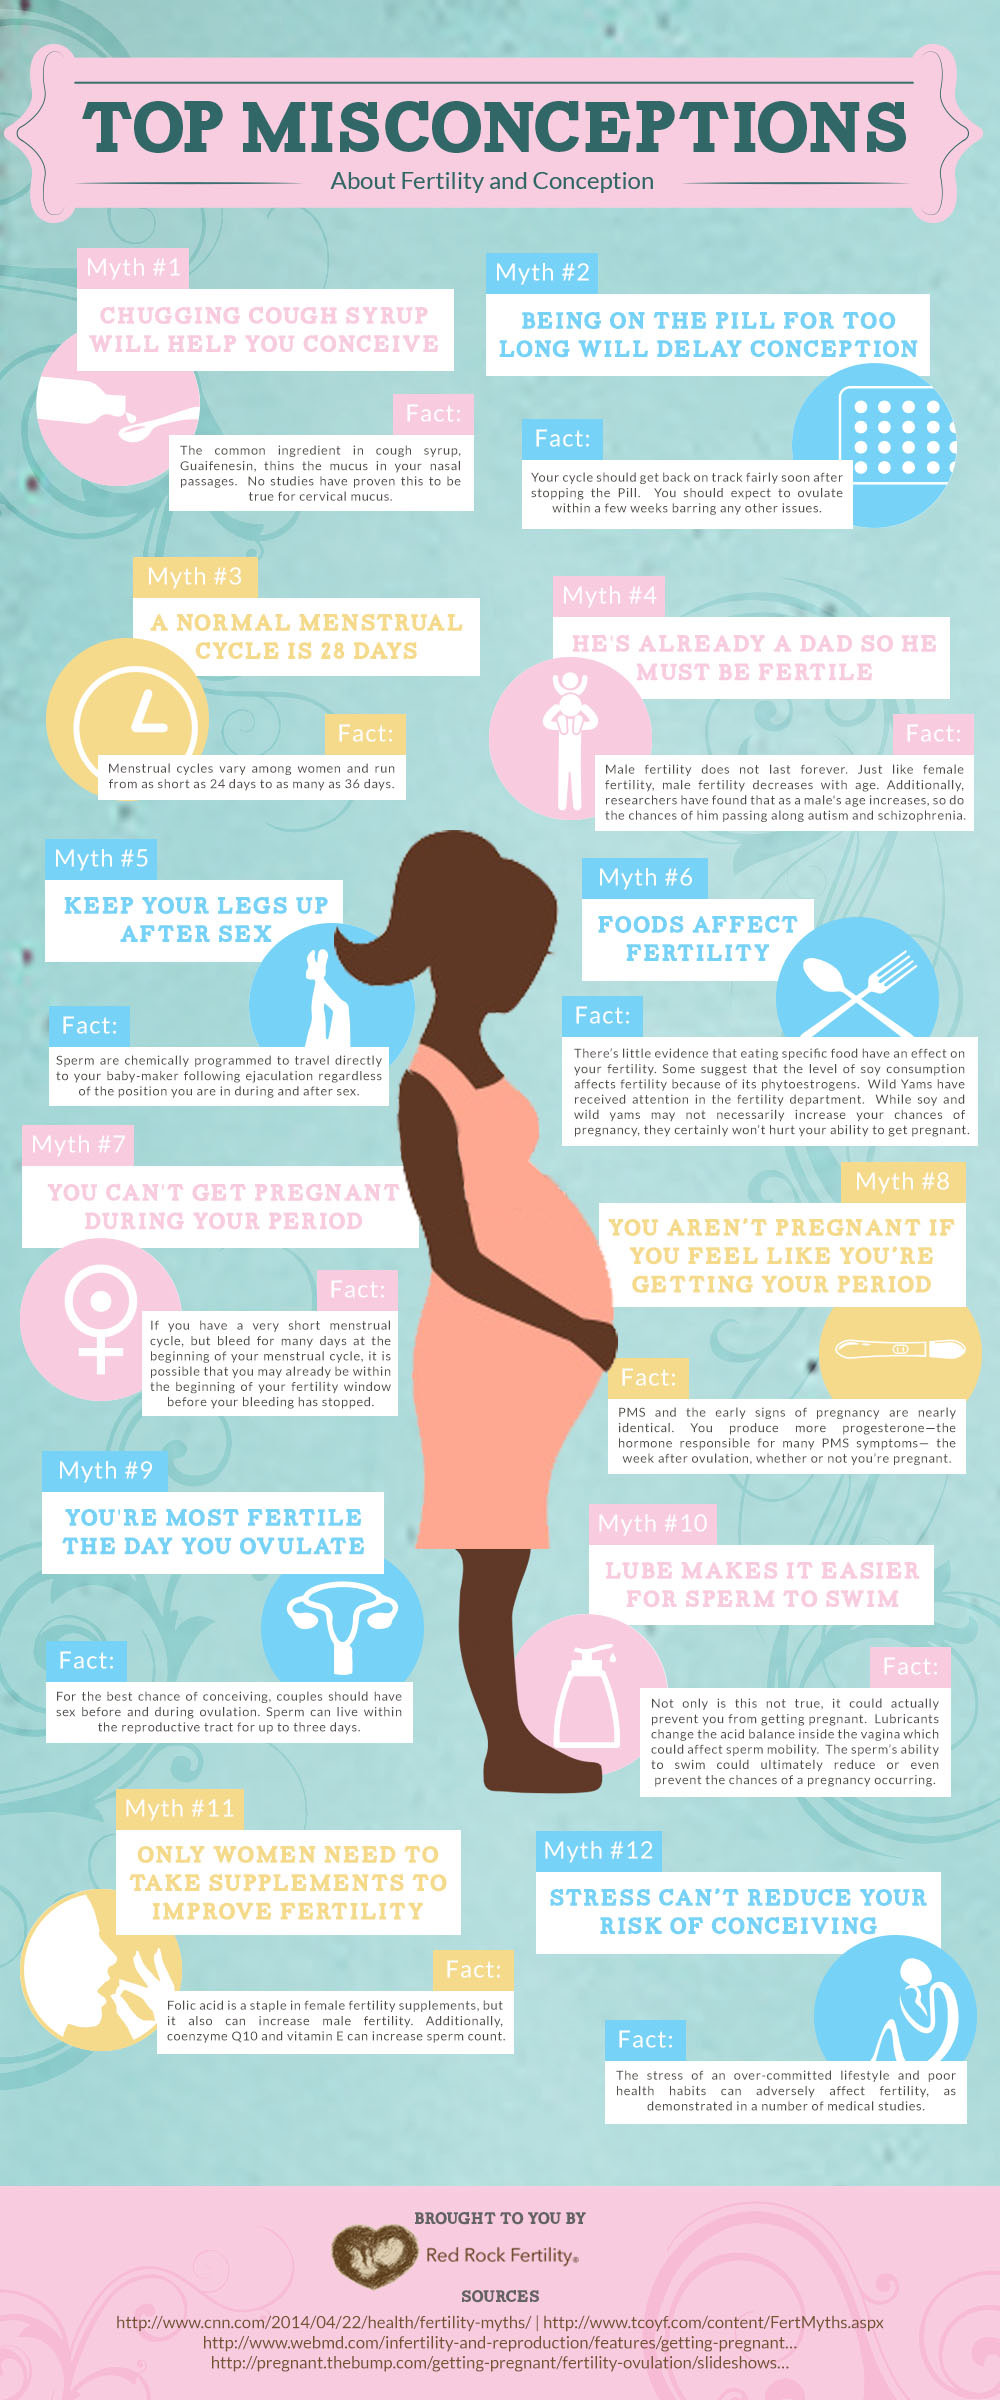 Top Misconceptions About Fertility Infographic Red Rock Fertility